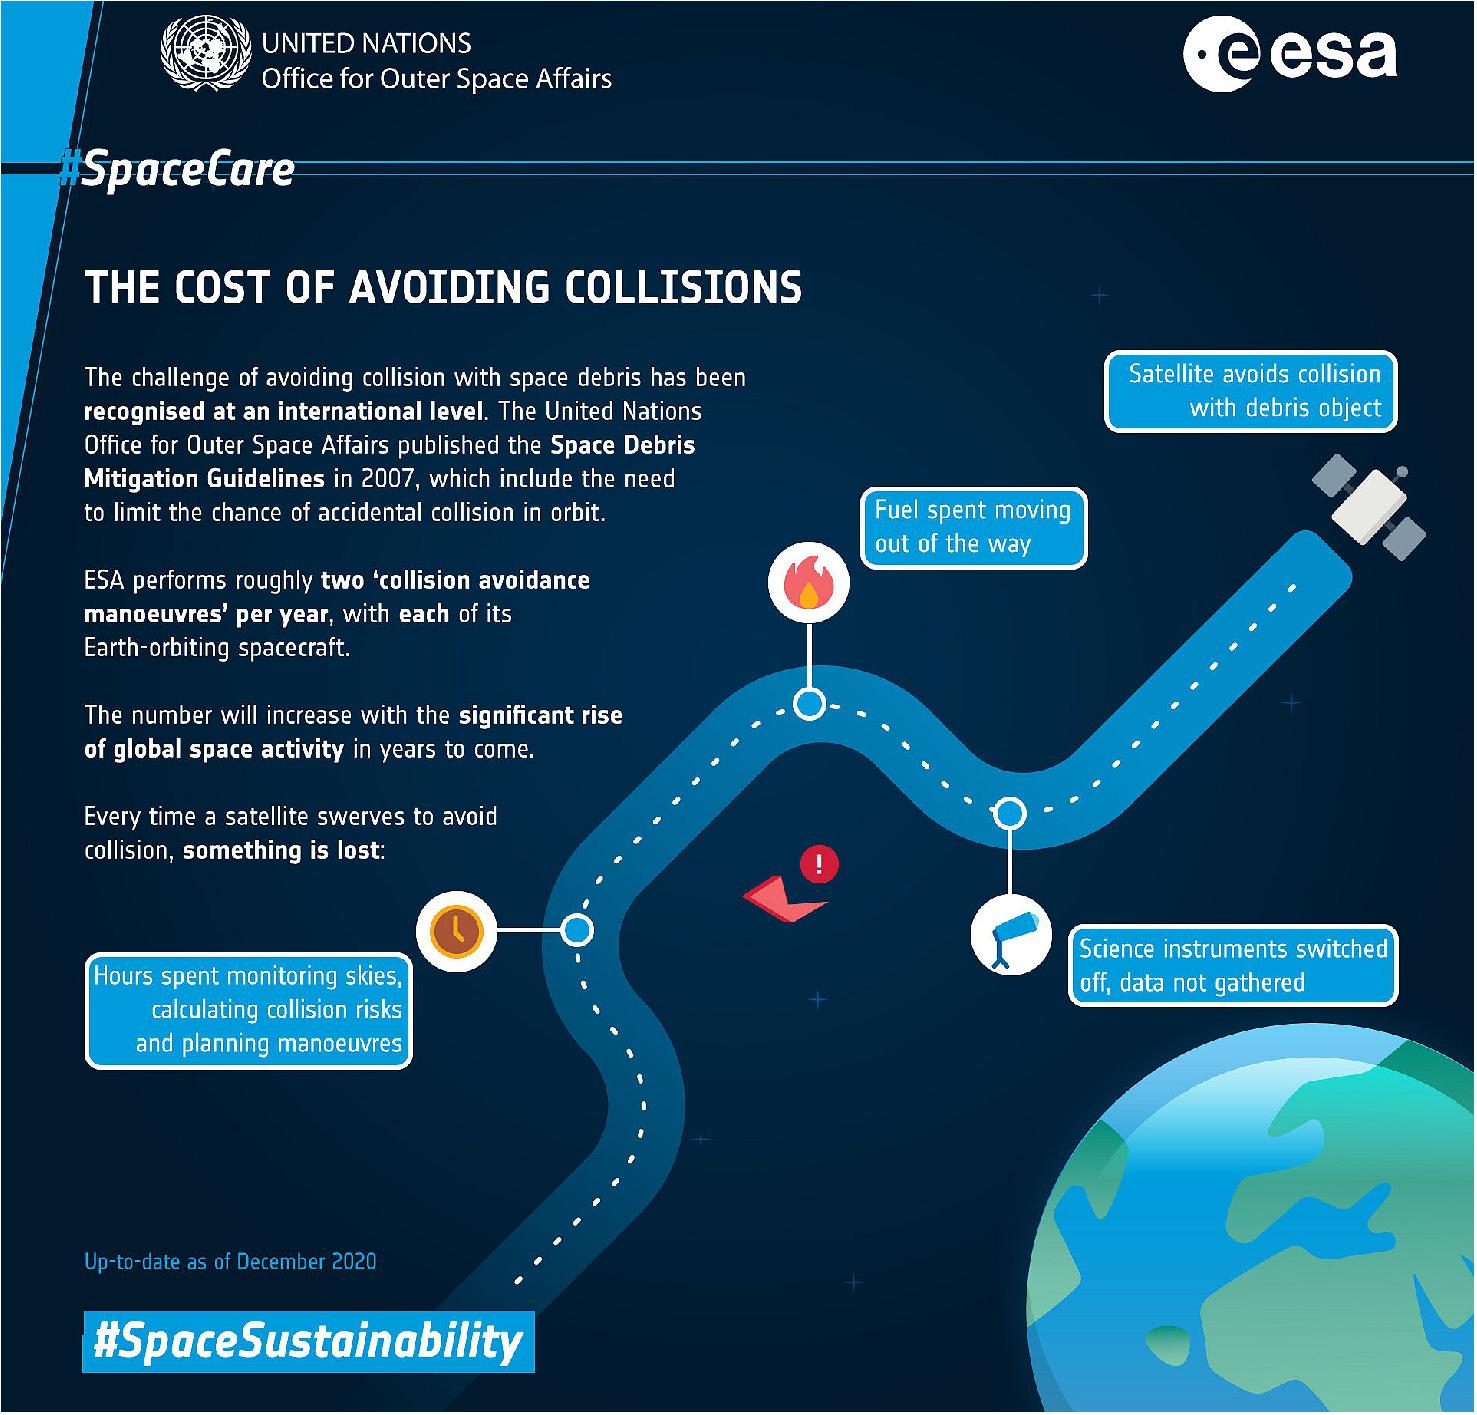 Figure 3: The cost of avoiding collision. Space might seem an empty, vast expanse, but satellites in Earth's orbit face the constant risk of collision - with other satellites, dead or alive, or with fragments of debris. It is now routine for operators of spacecraft in busy highways to divert their mission out of harms way. In fact at ESA, each mission flown performs on average two 'collision avoidance manoeuvres' per year. These manoeuvres are costly. Hours are spent on the ground monitoring the skies, calculating the risk and planning manoeuvres, not to mention the extra fuel spent and missed science and data collected while instruments are turned off. (image credit: ESA / UNOOSA)